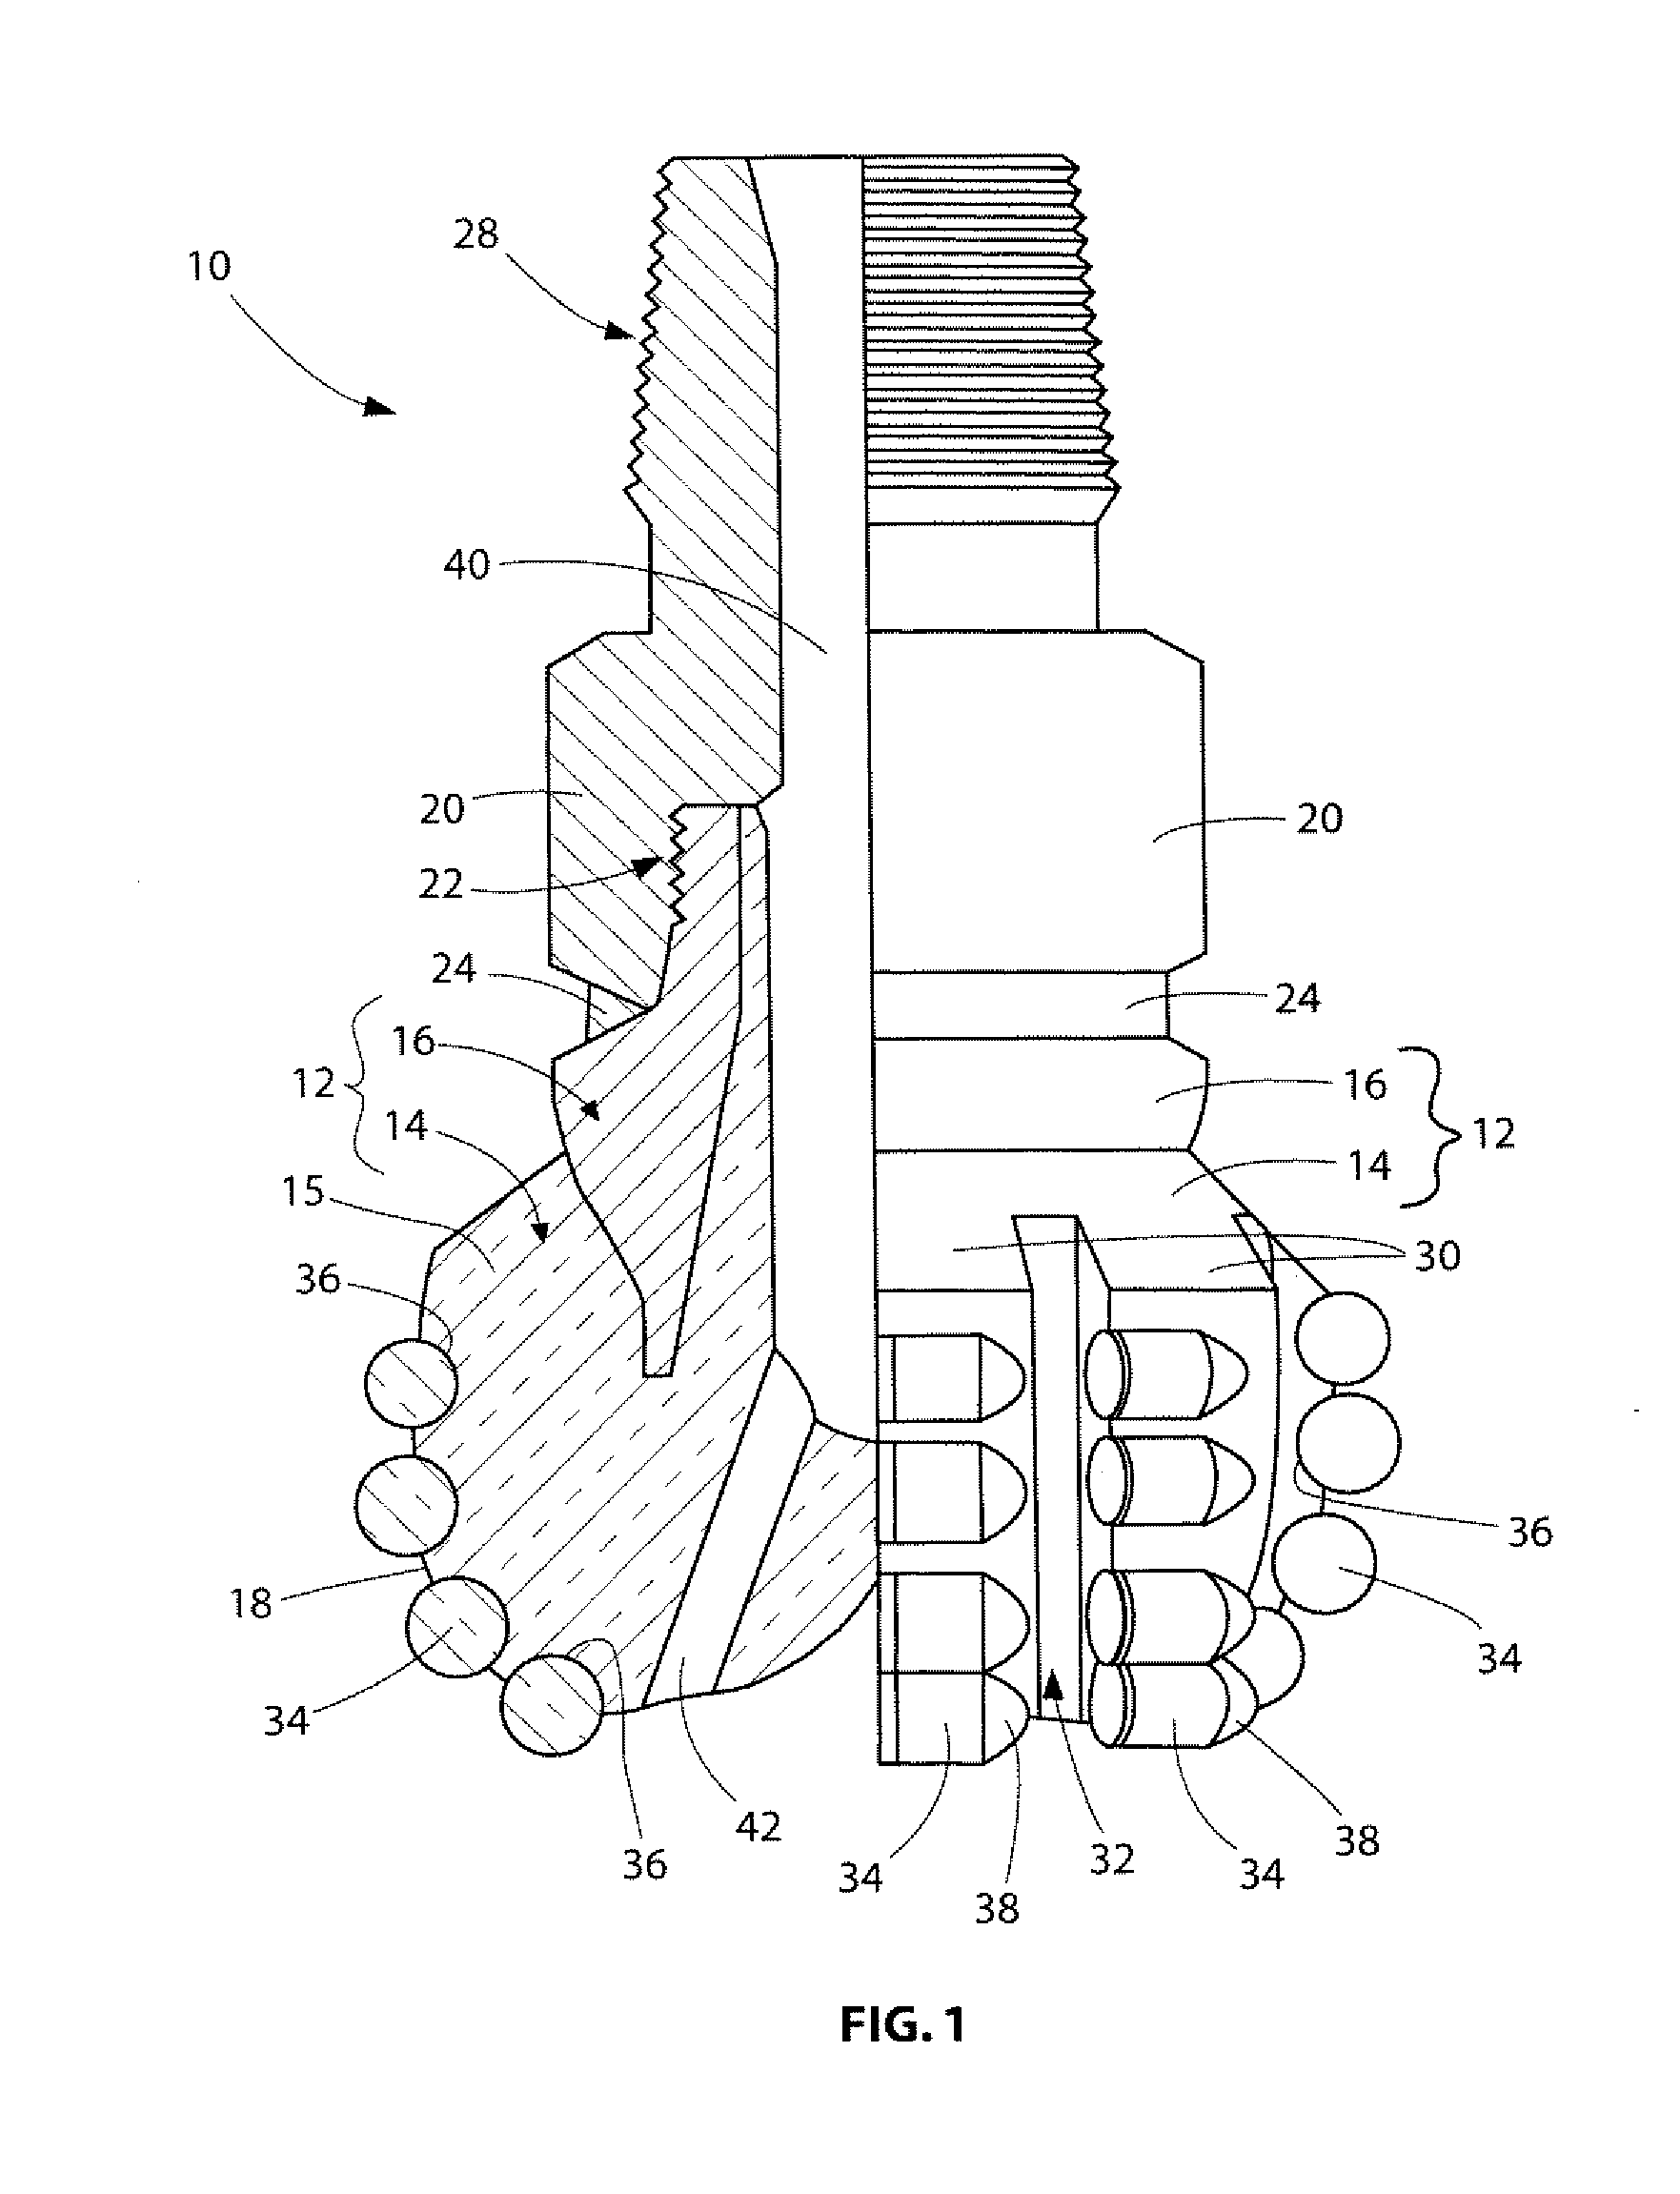 Silicon carbide composite materials, earth-boring tools comprising such materials, and methods for forming the same